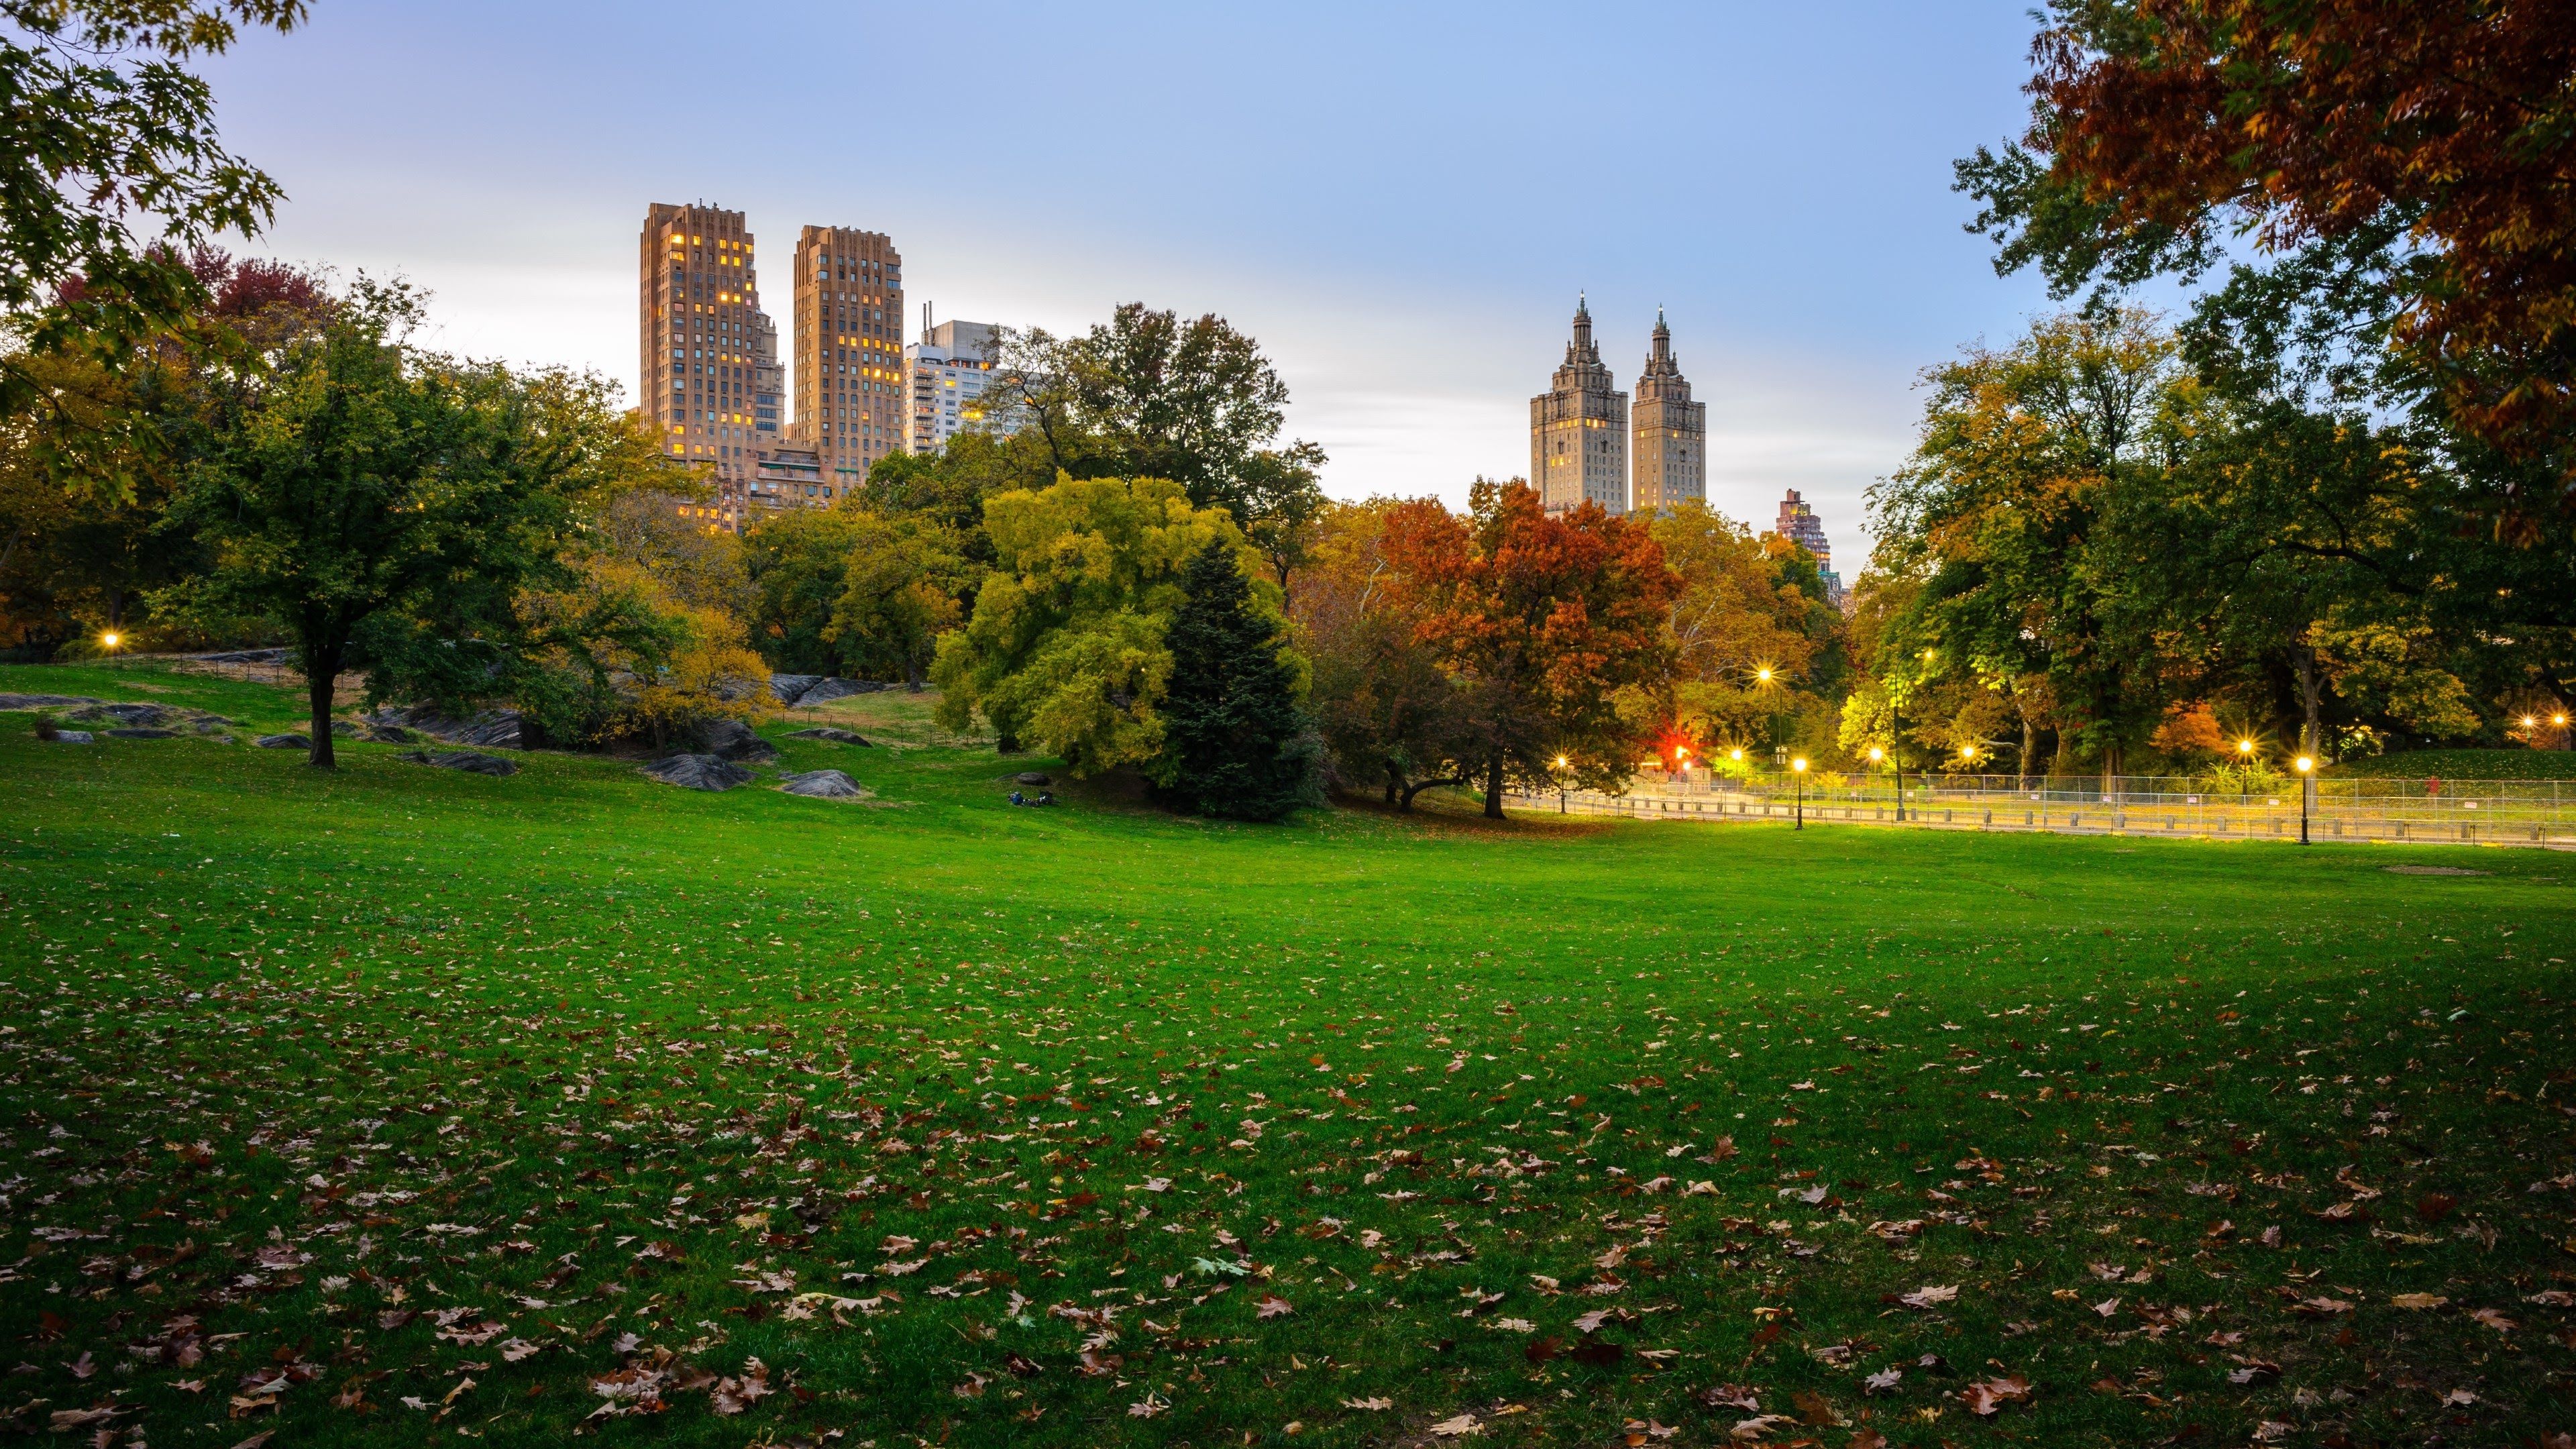 Wallpaper USA, New York, Central Park, skyscrapers, lawn, trees, autumn 3840x2160 UHD 4K Picture, Image